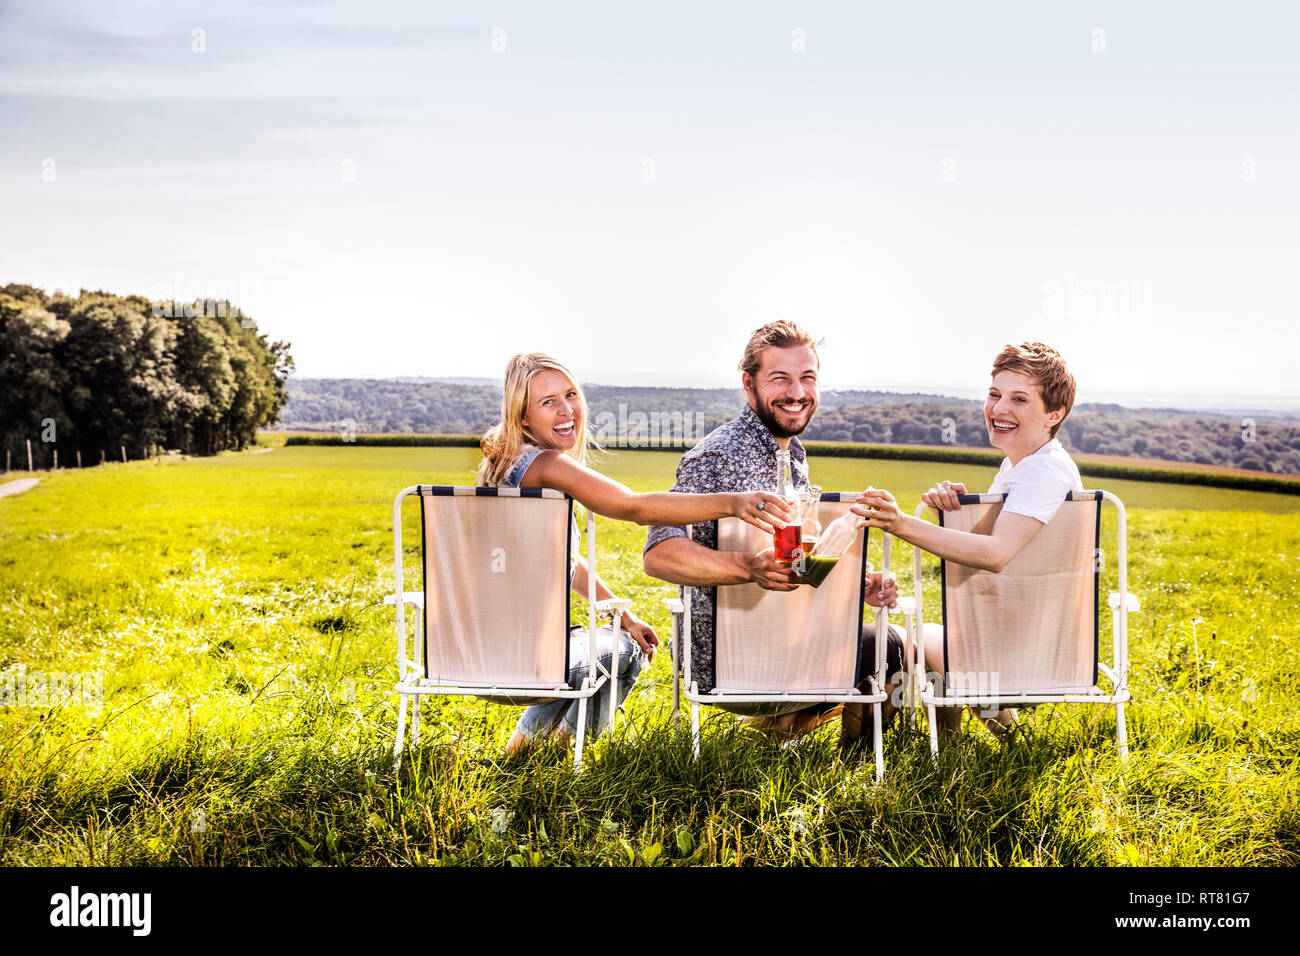 Happy friends sitting on camping chairs in rural landscape clinking bottles Stock Photo